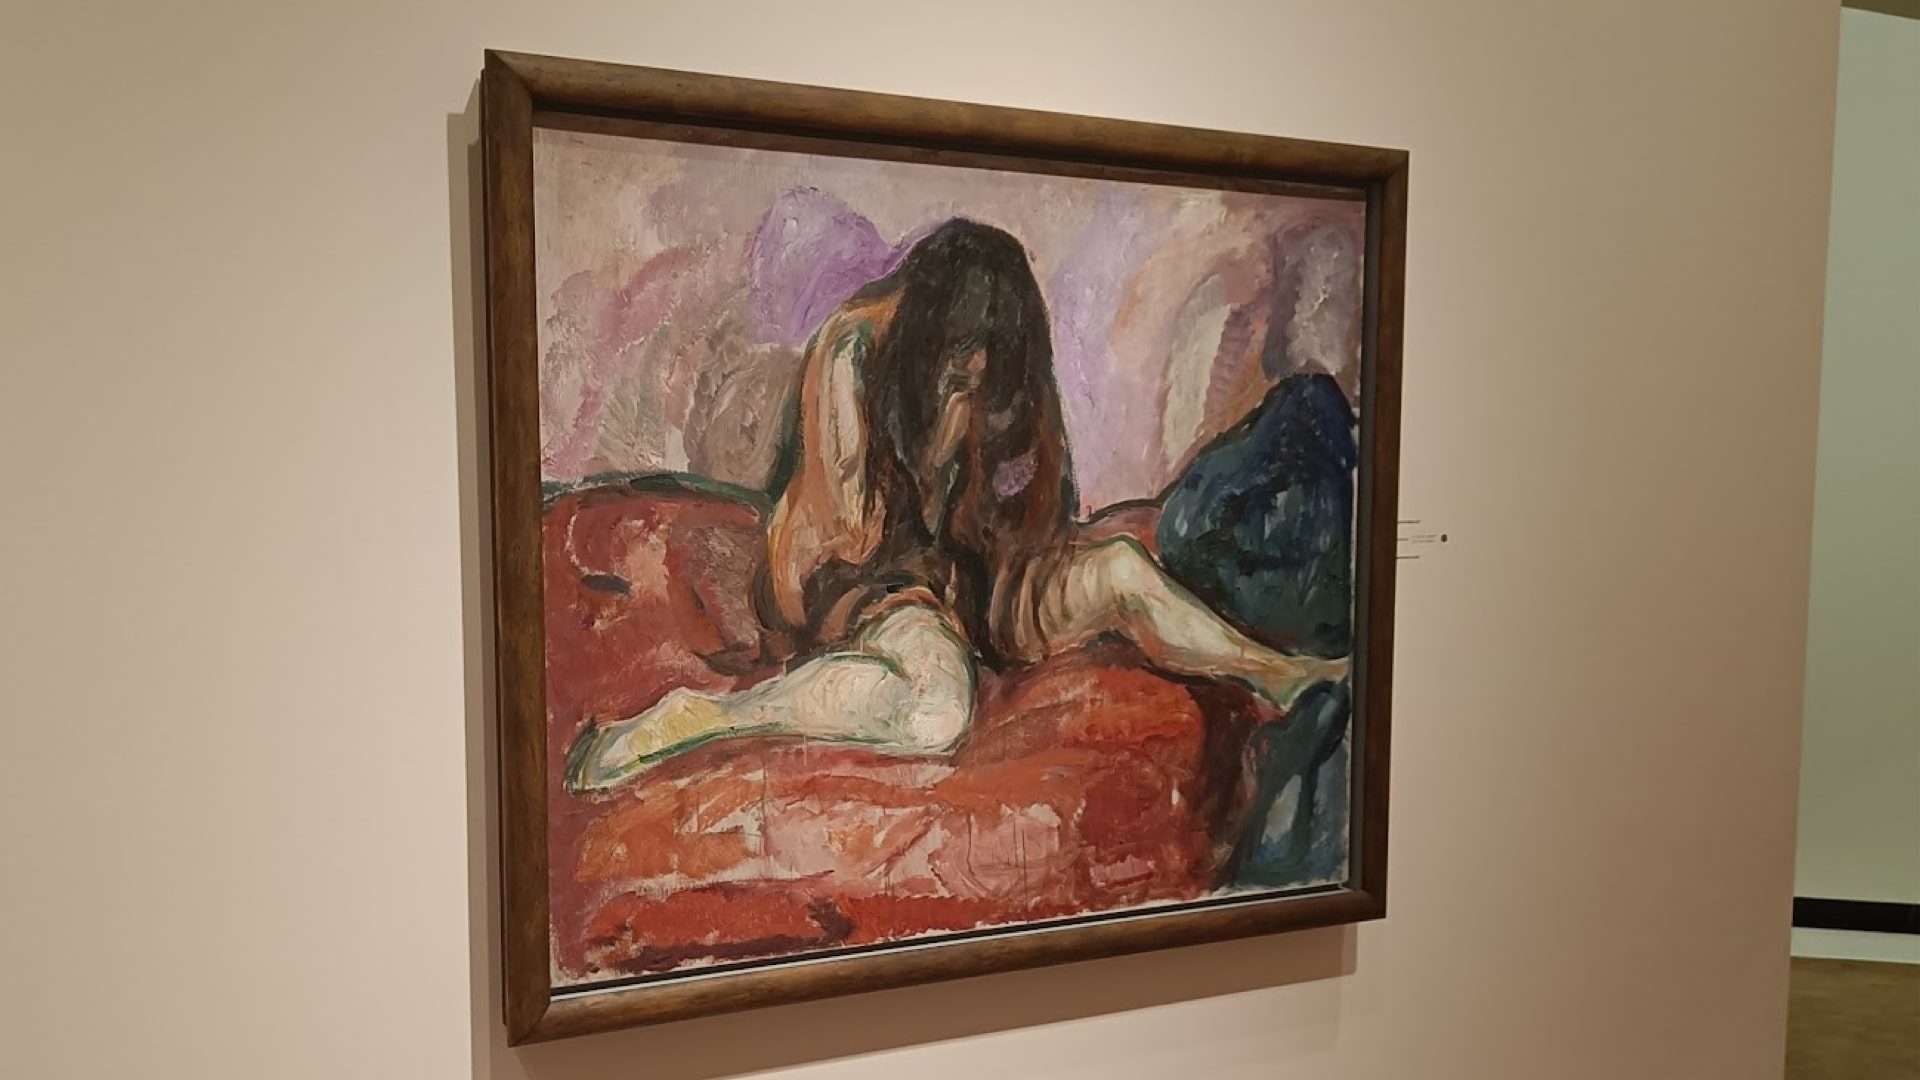 A photo of some of Munch's work